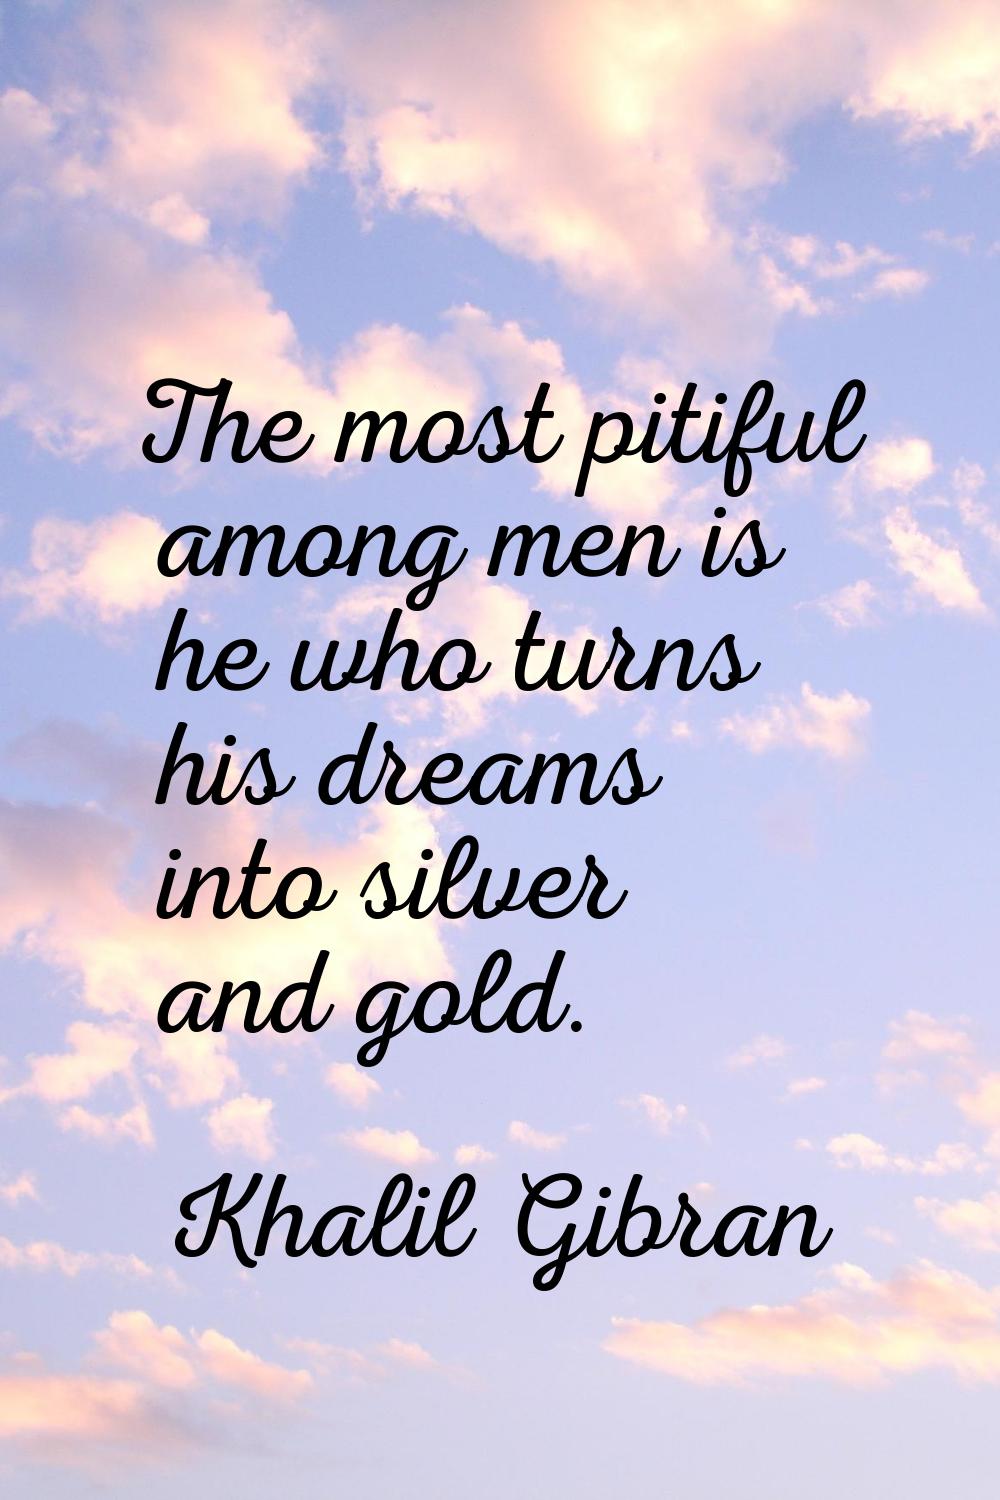 The most pitiful among men is he who turns his dreams into silver and gold.